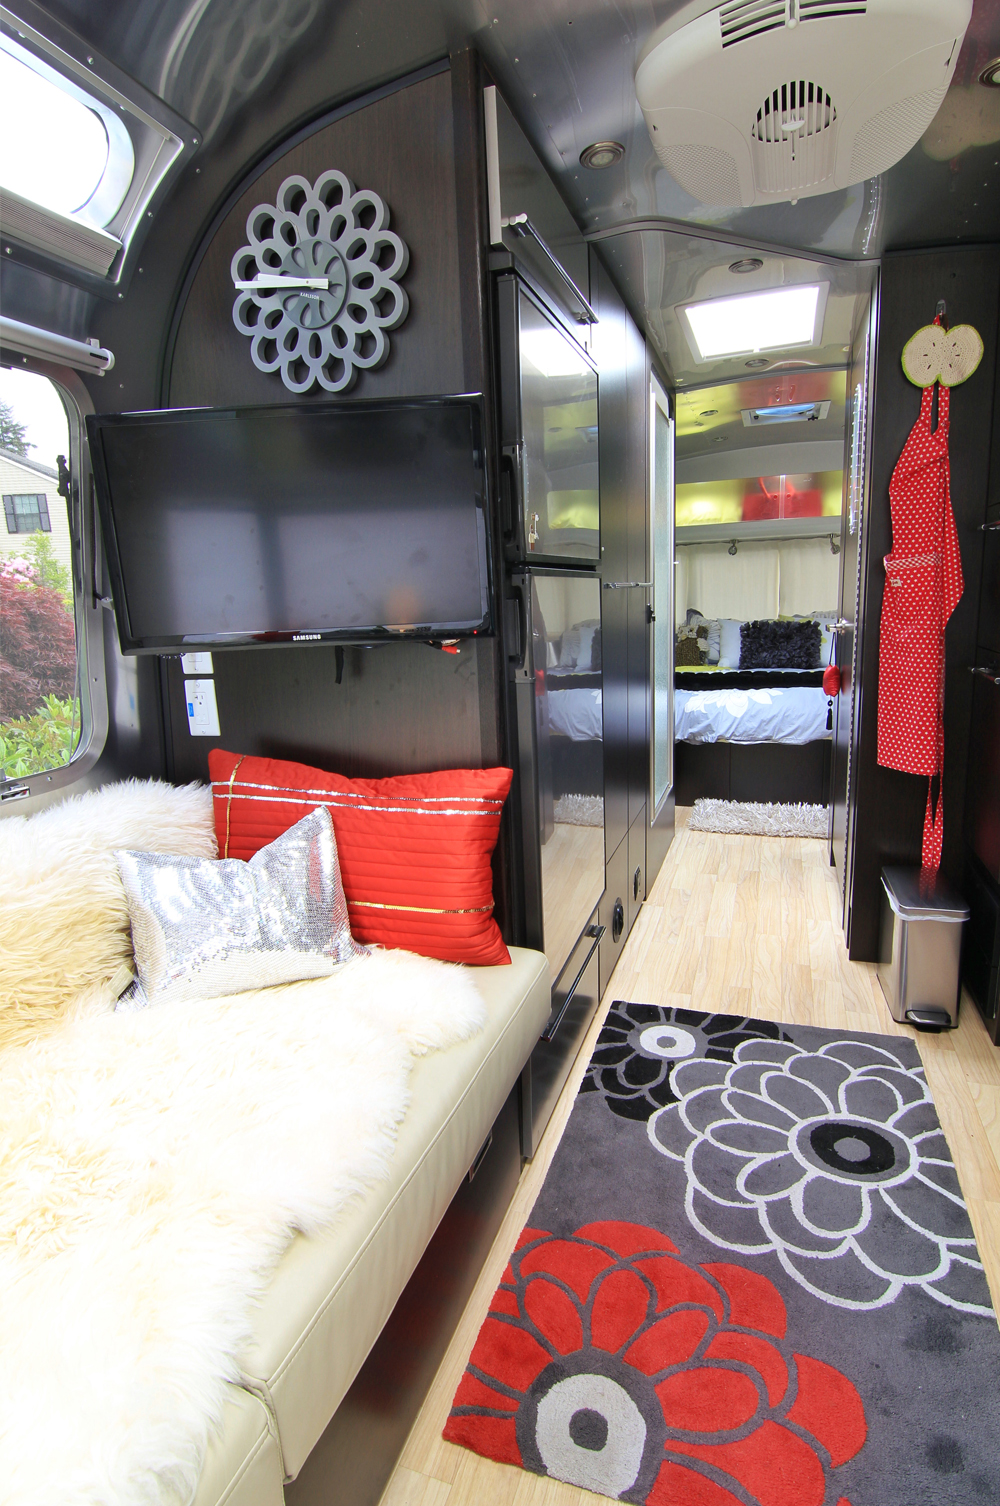 A View of the Airstream inside facing the bedroom